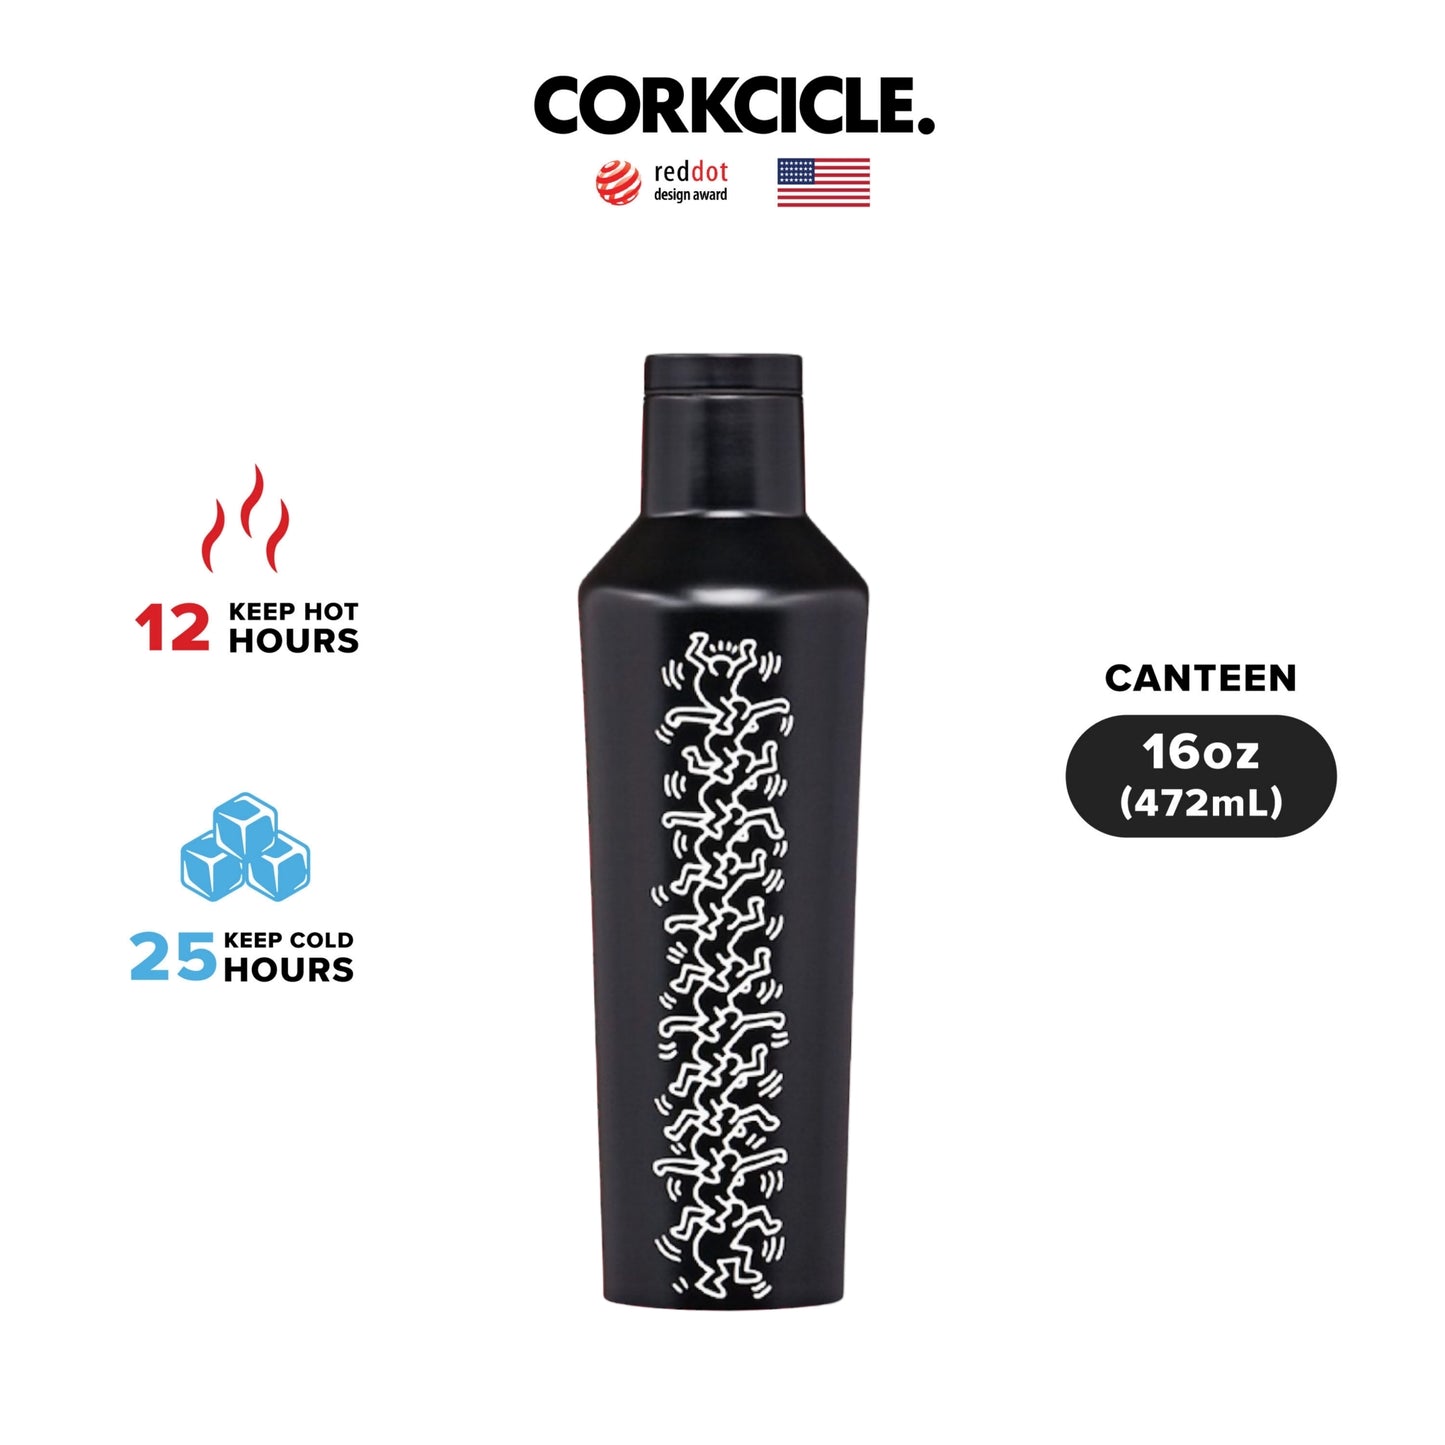 CORKCICLE : CANTEEN PEOPLE STACK KEITH HARING 16 OZ